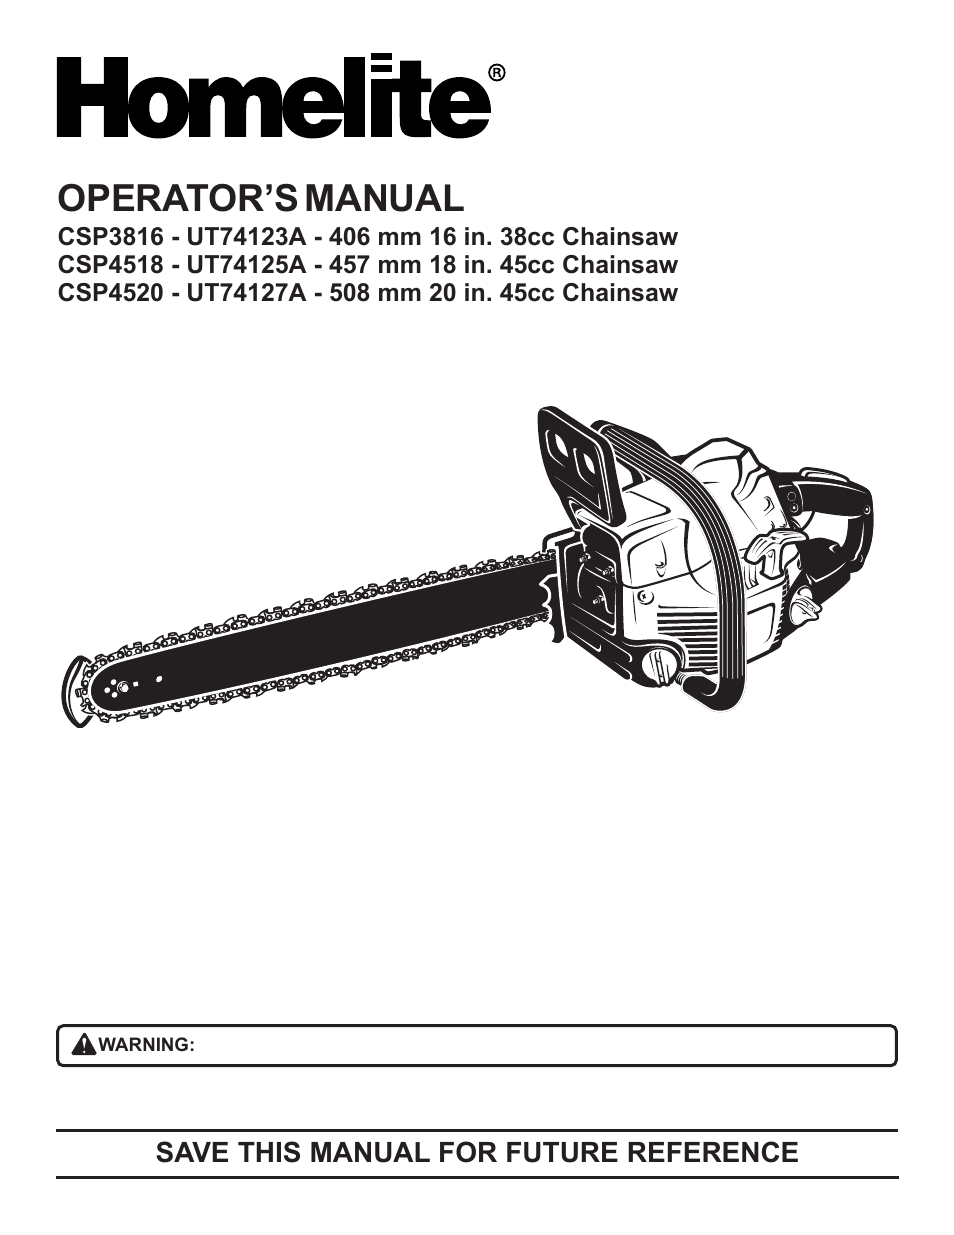 Homelite CSP3816 - UT74123A User Manual | 40 pages